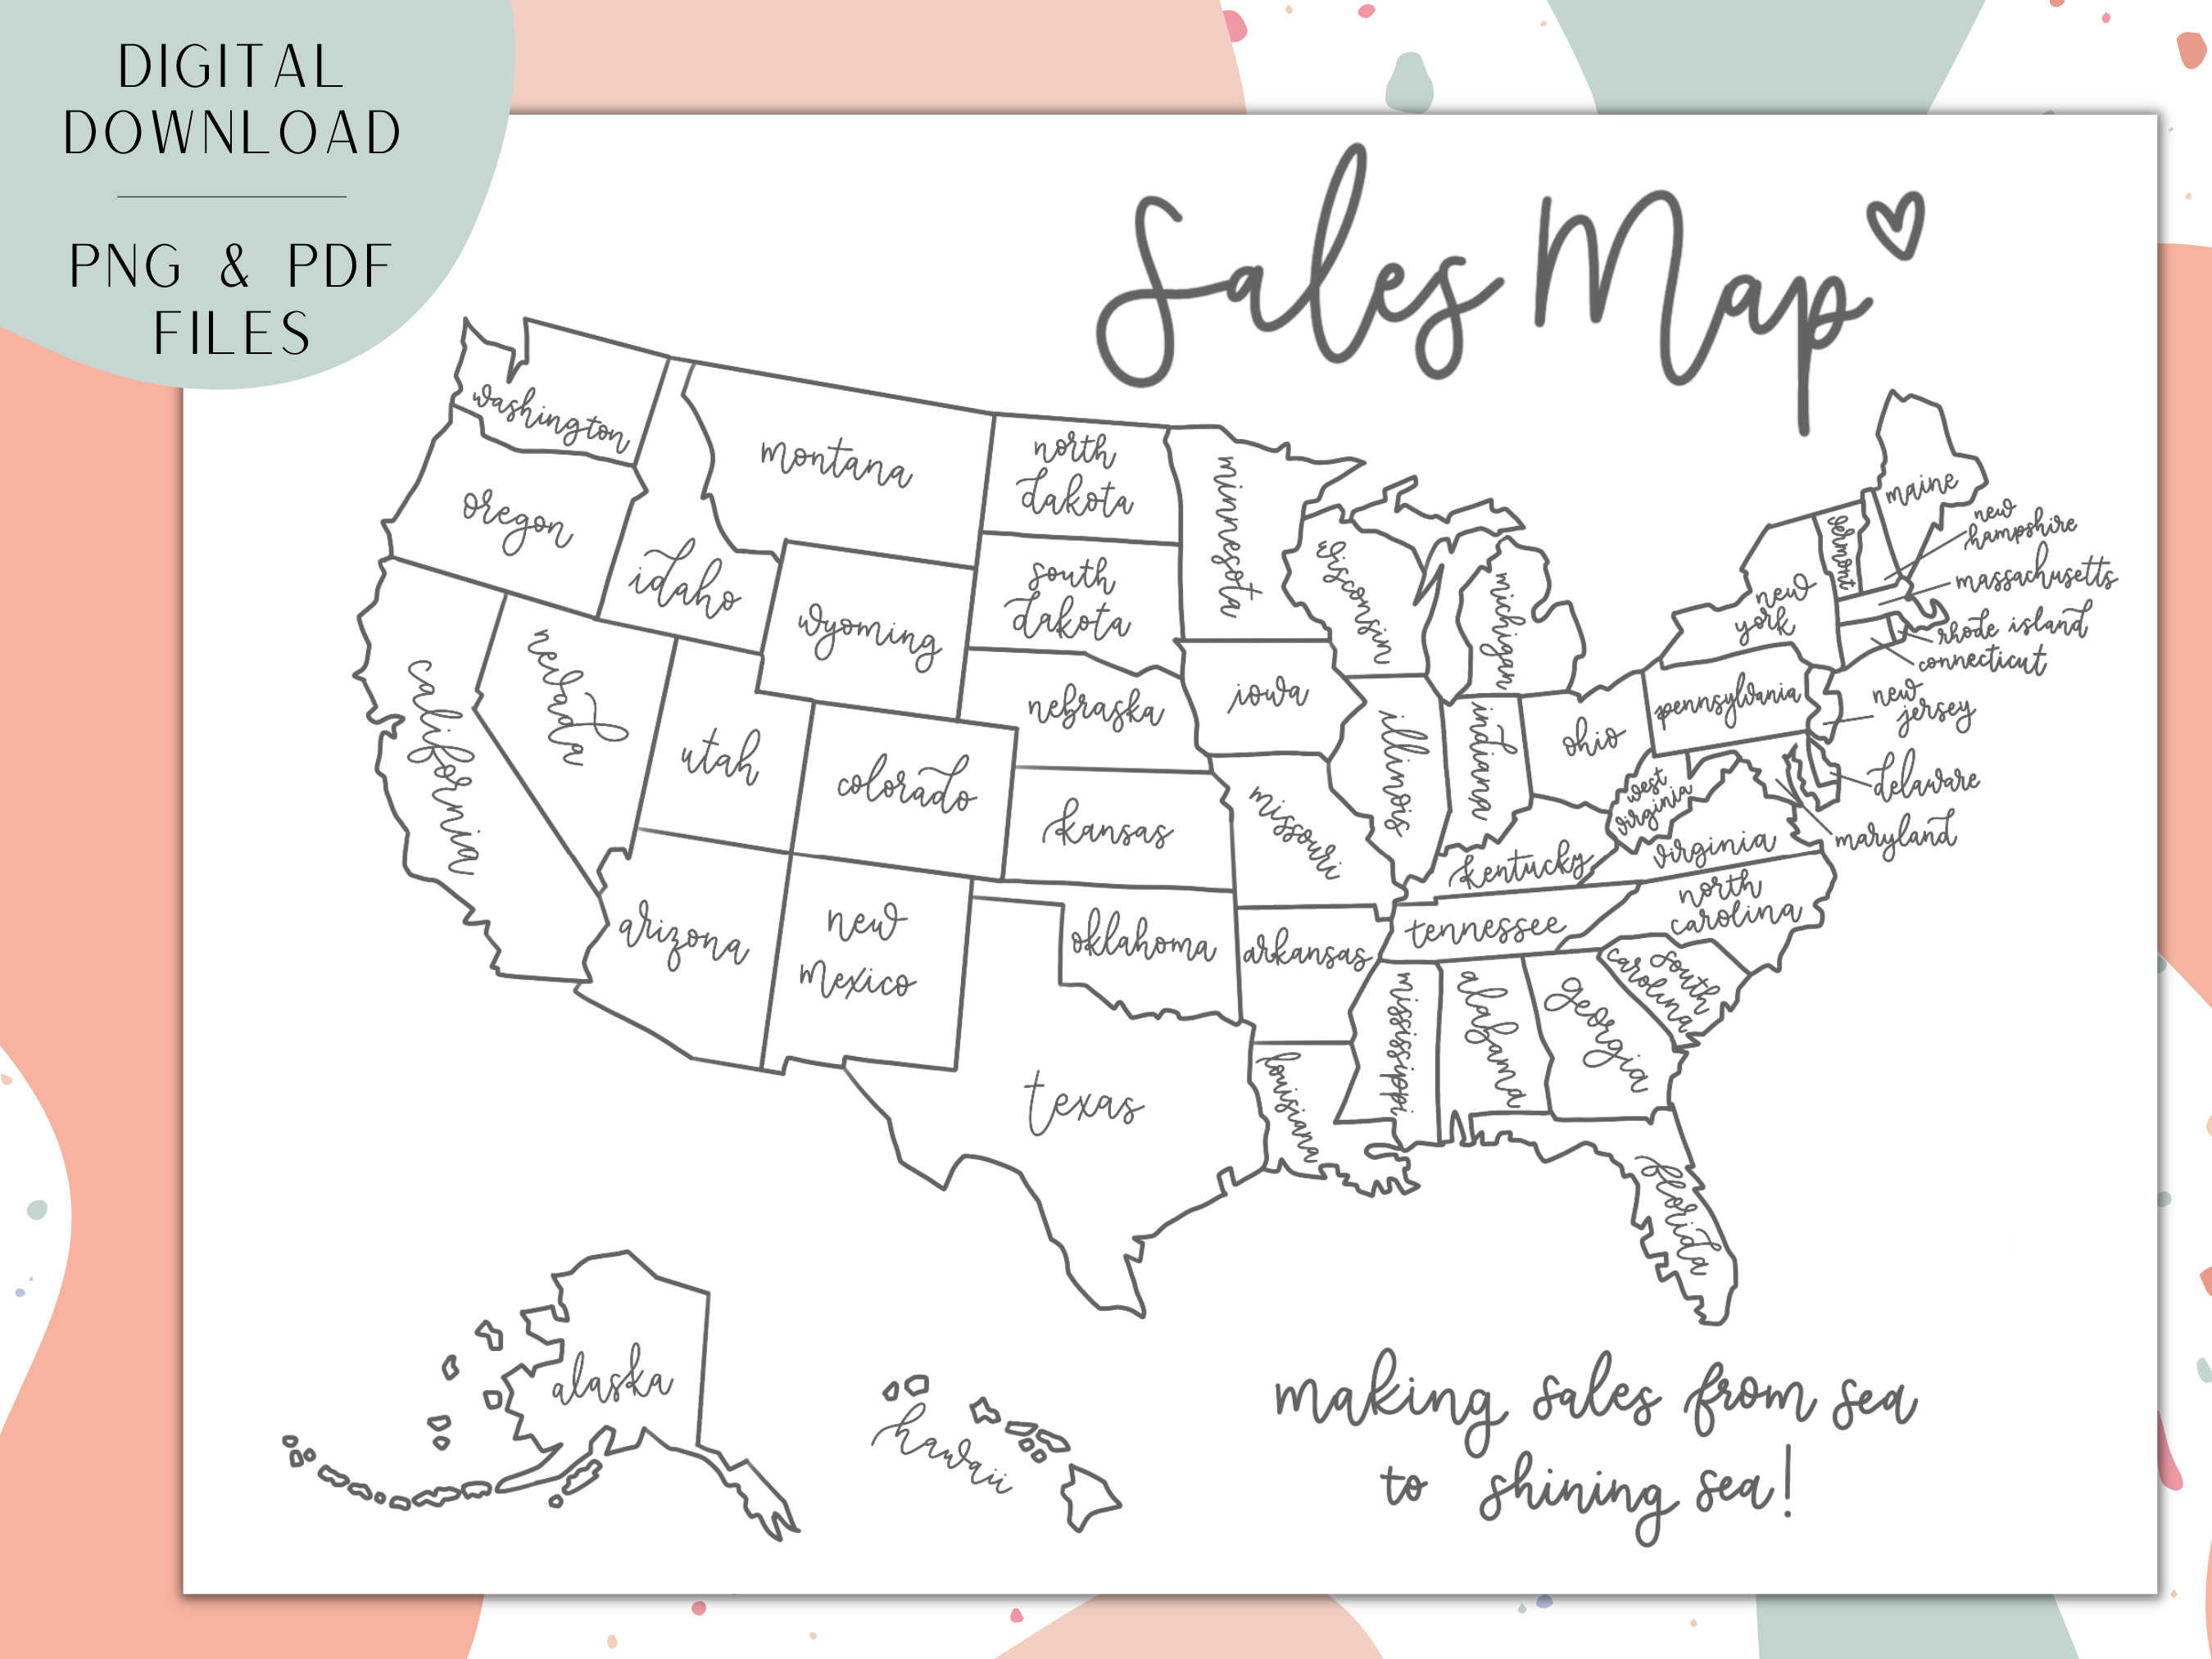 us-sales-map-for-small-business-printable-sales-map-map-etsy